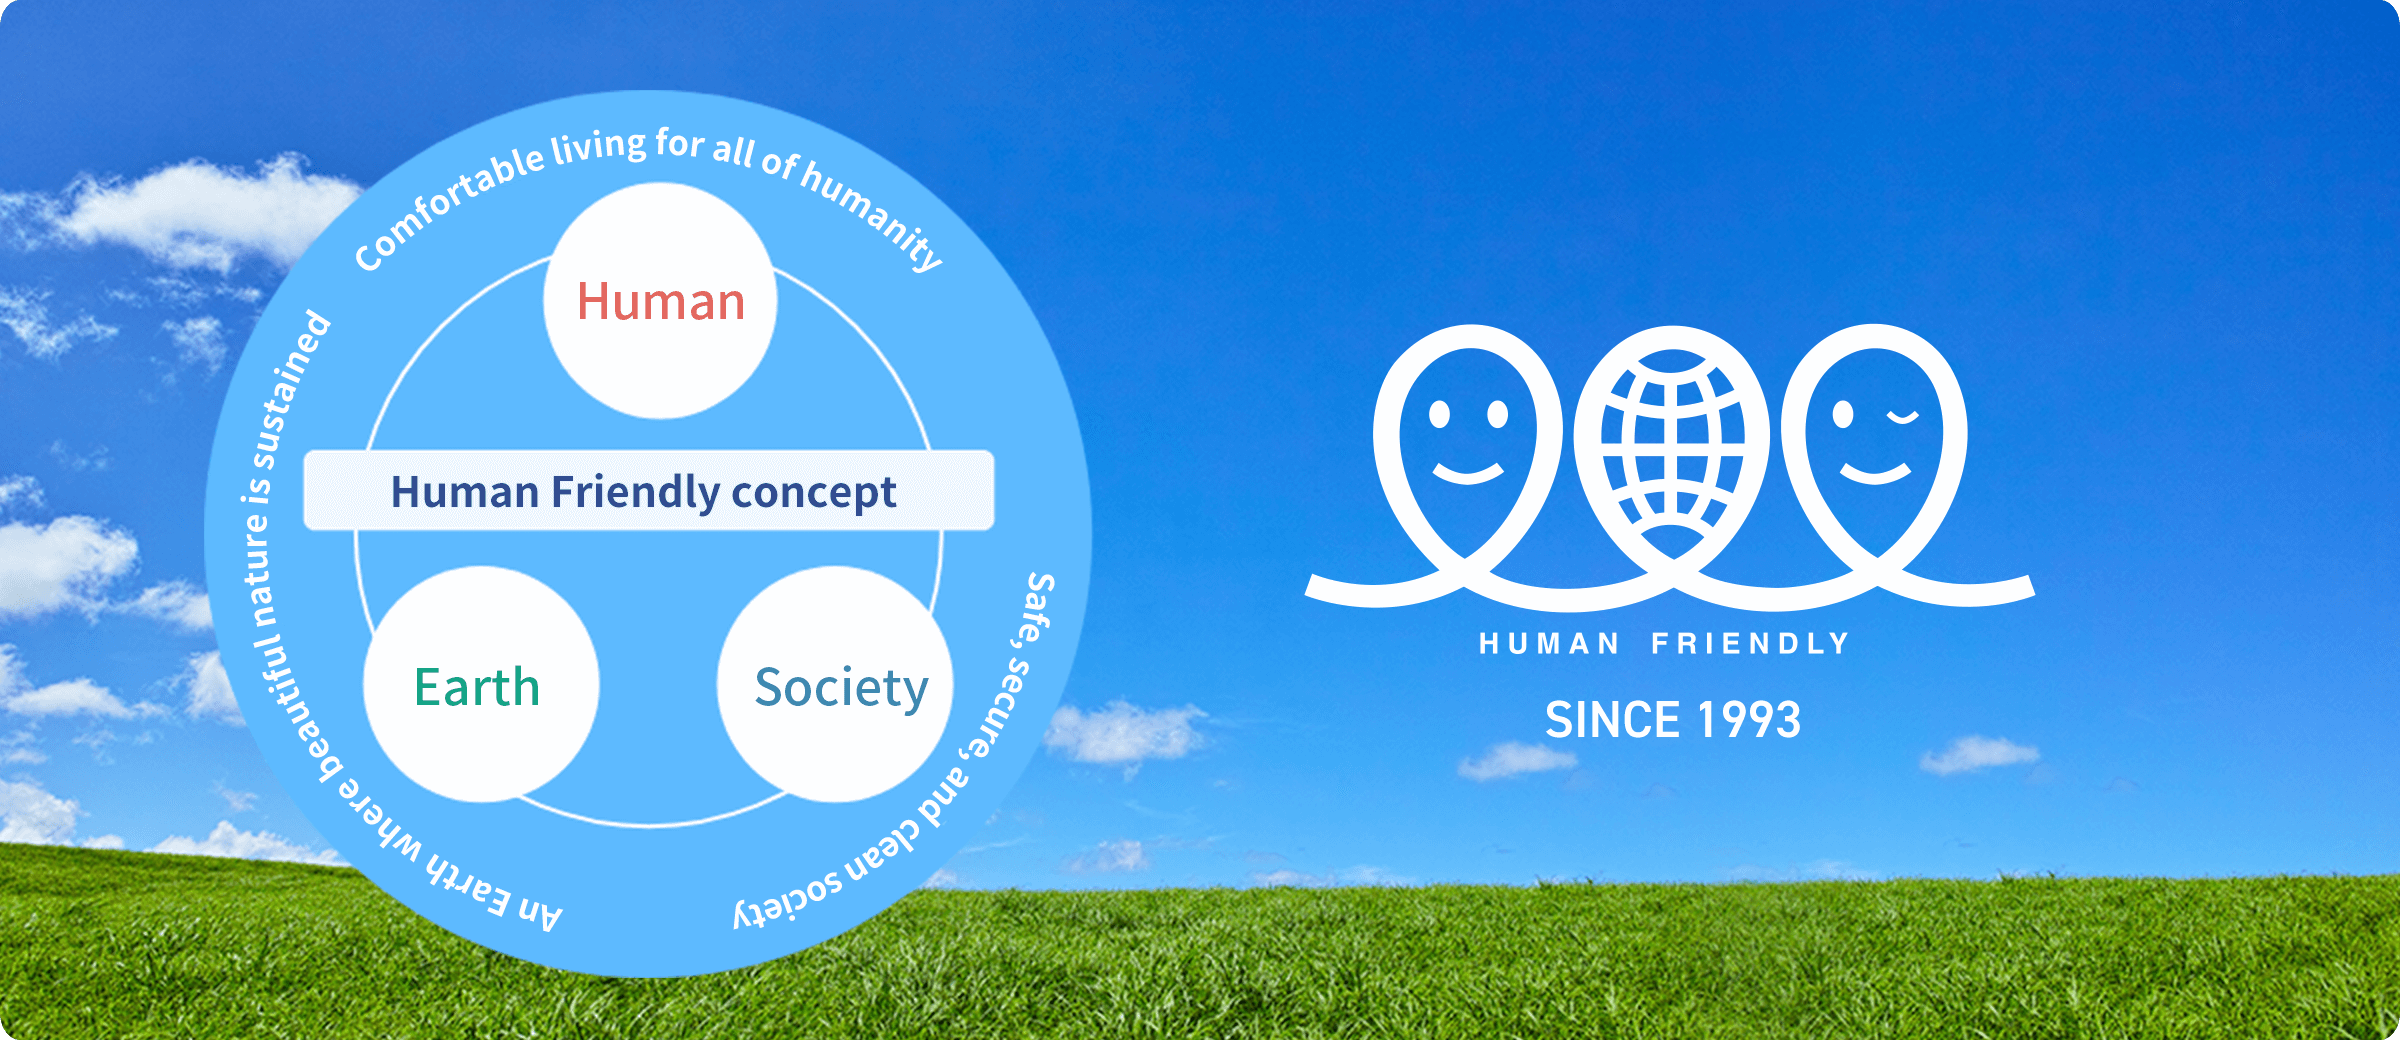 Human Friendly concept. Human: Comfortable living for all of humanity. Earth: An Earth where beautiful nature is sustained. Society: Safe, secure, and clean society.